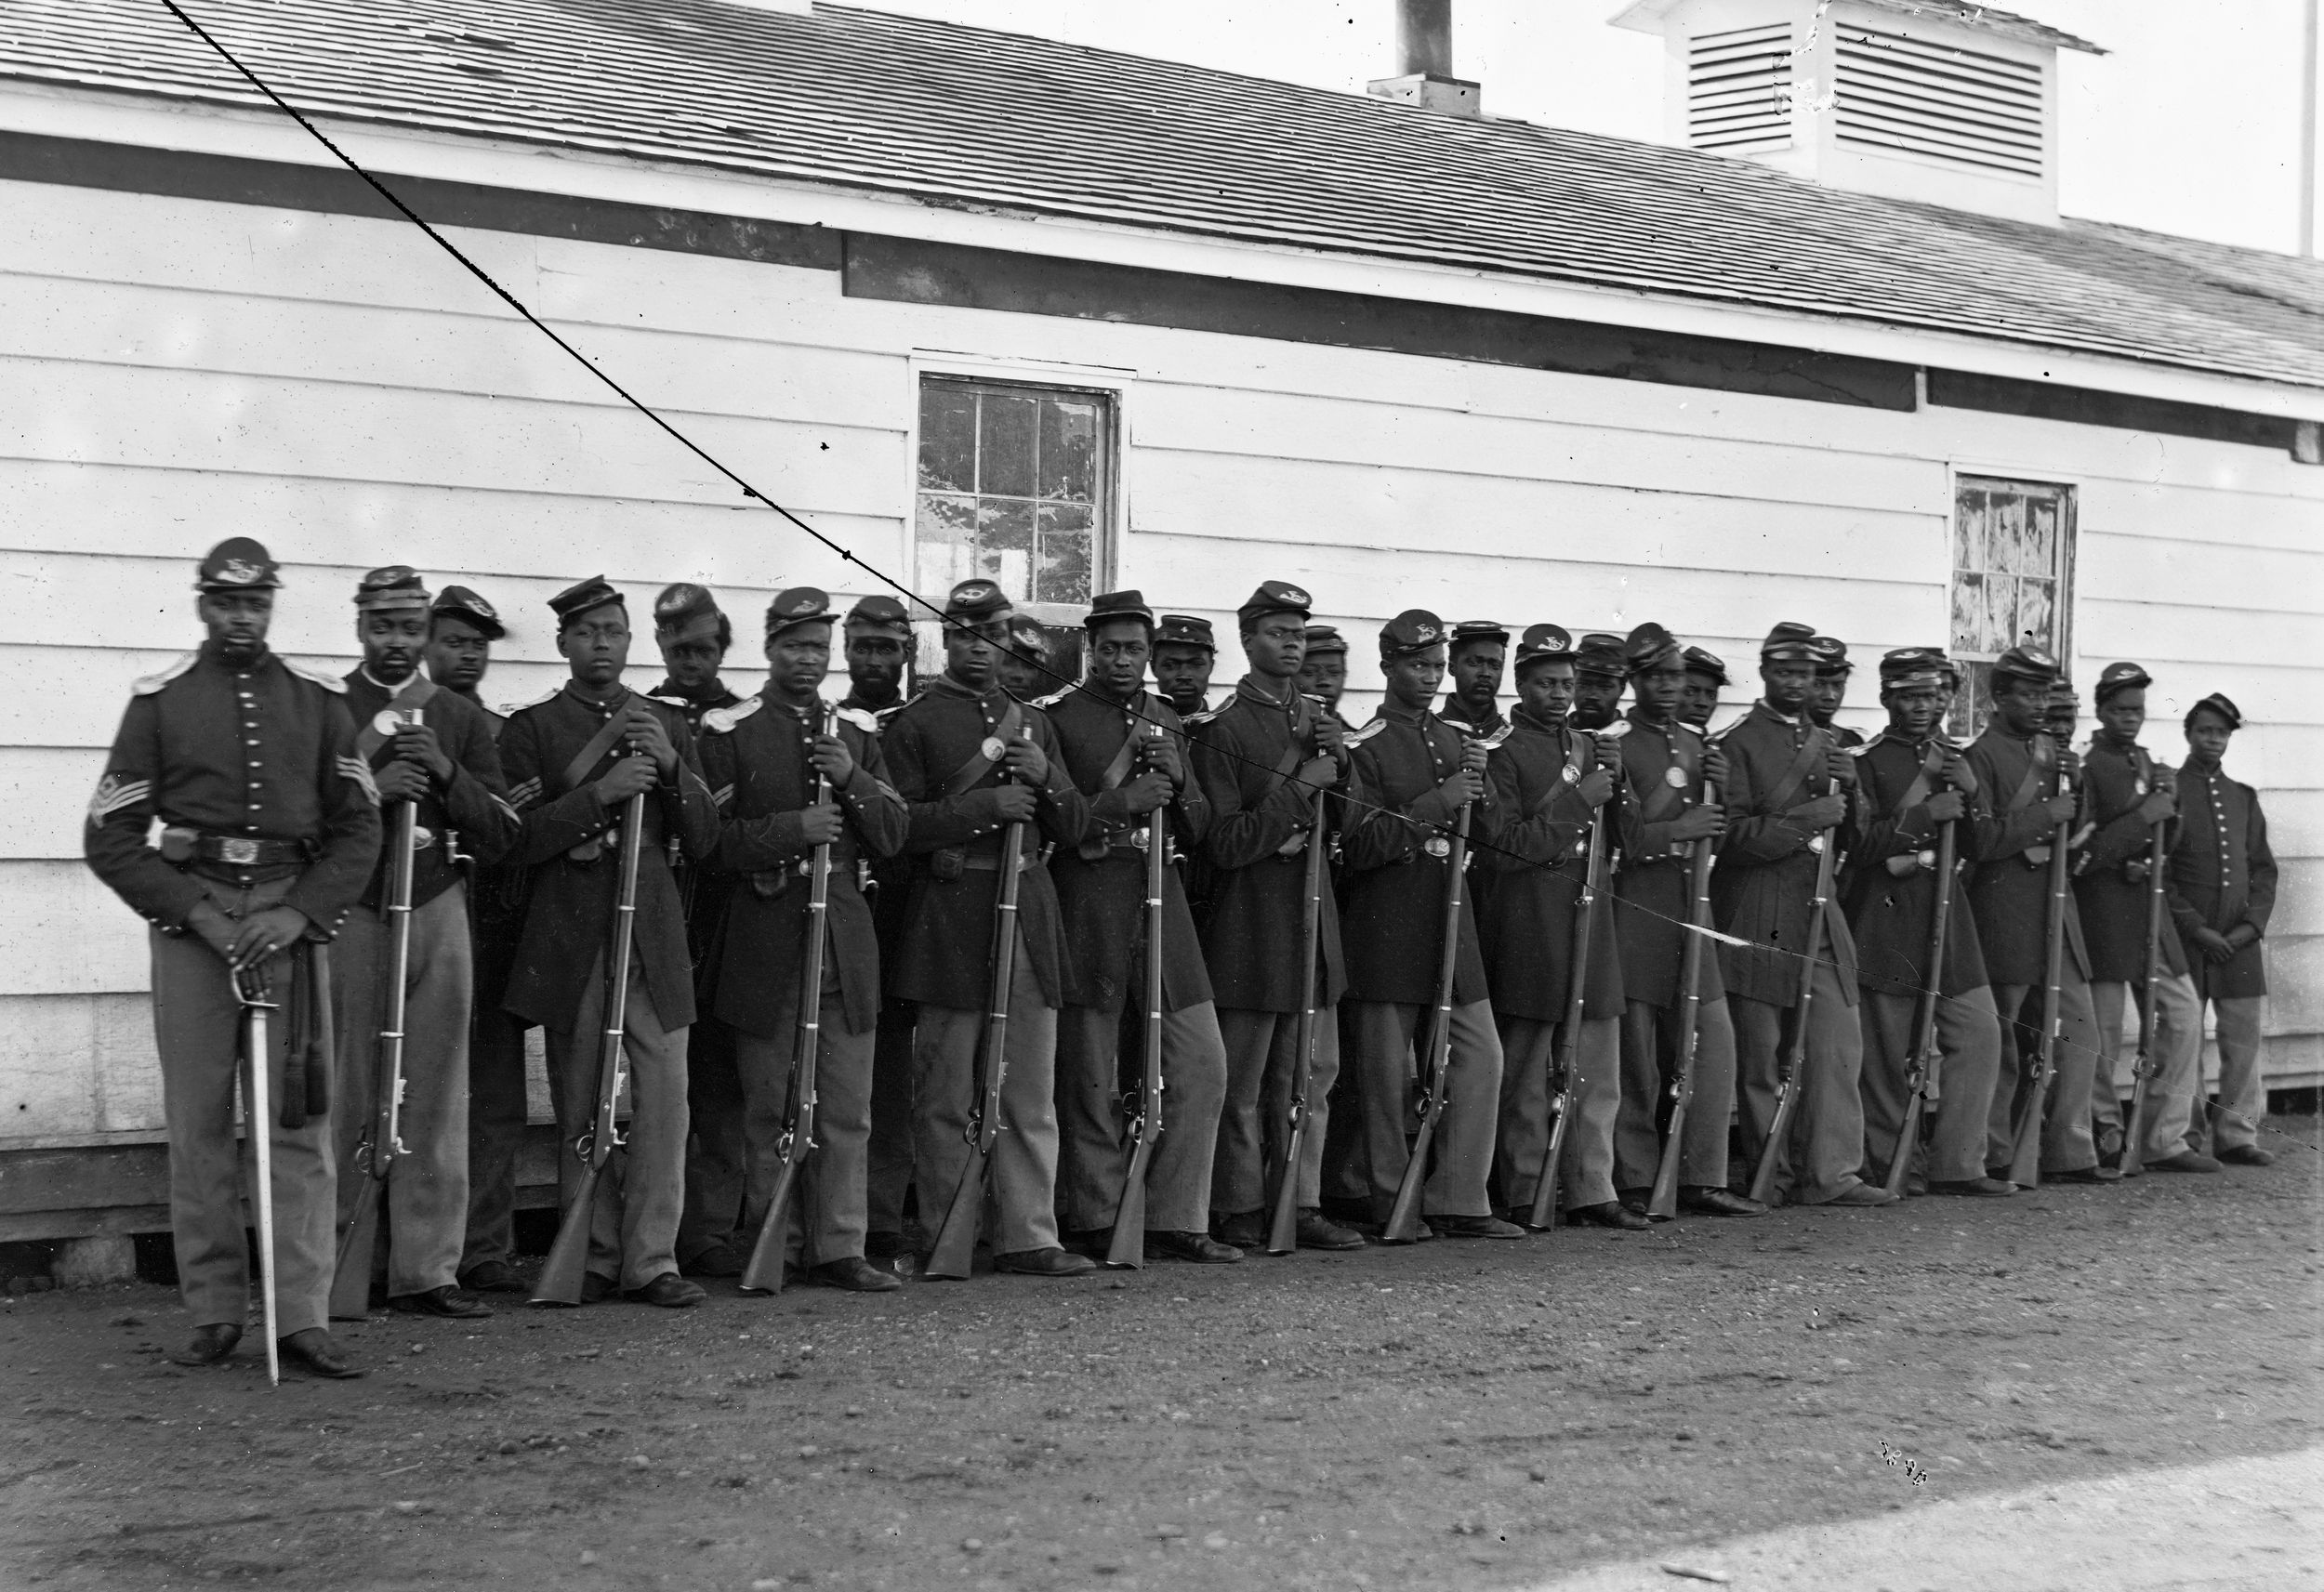 Company E, 4th U.S. Colored Infantry, at Fort Lincoln in Washington, D.C. 